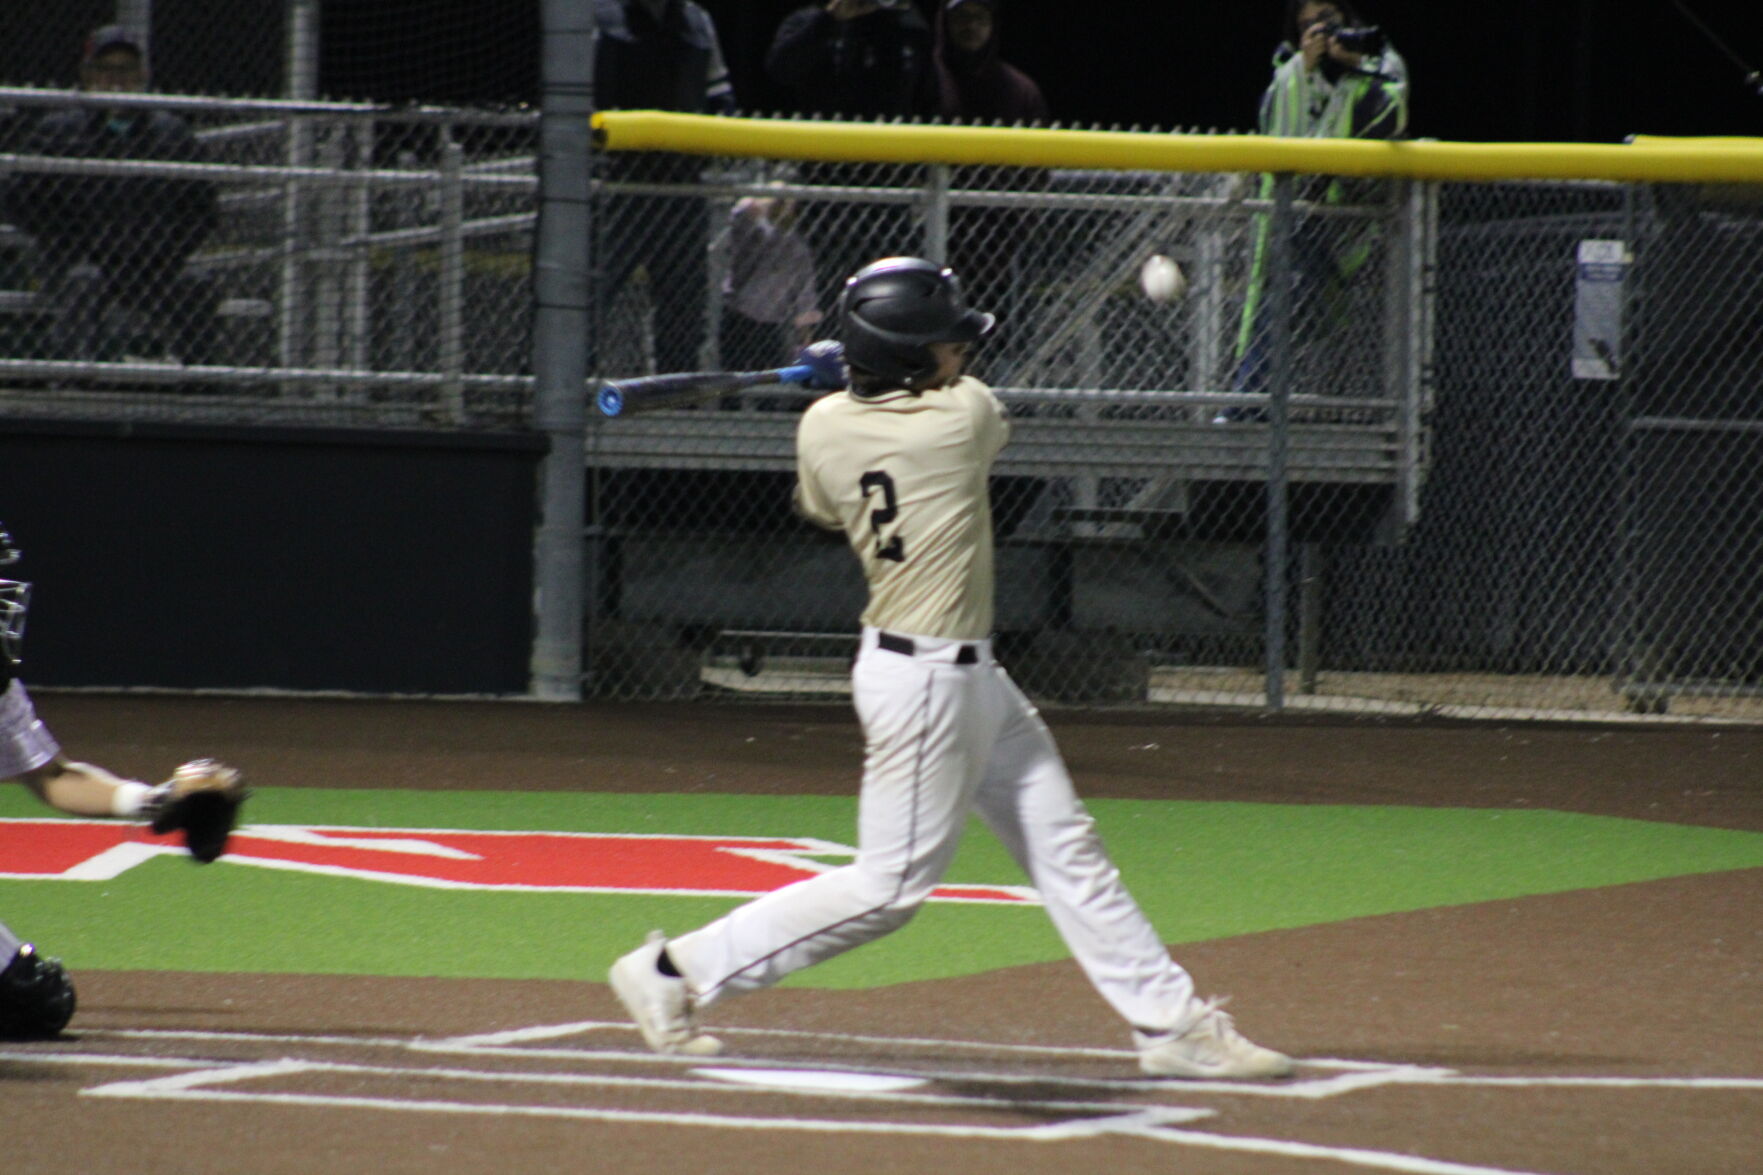 The Colony Triumphs Over Creekview with Trey Rangel’s Go-Ahead RBI Double; Hebron Sweeps Coppell